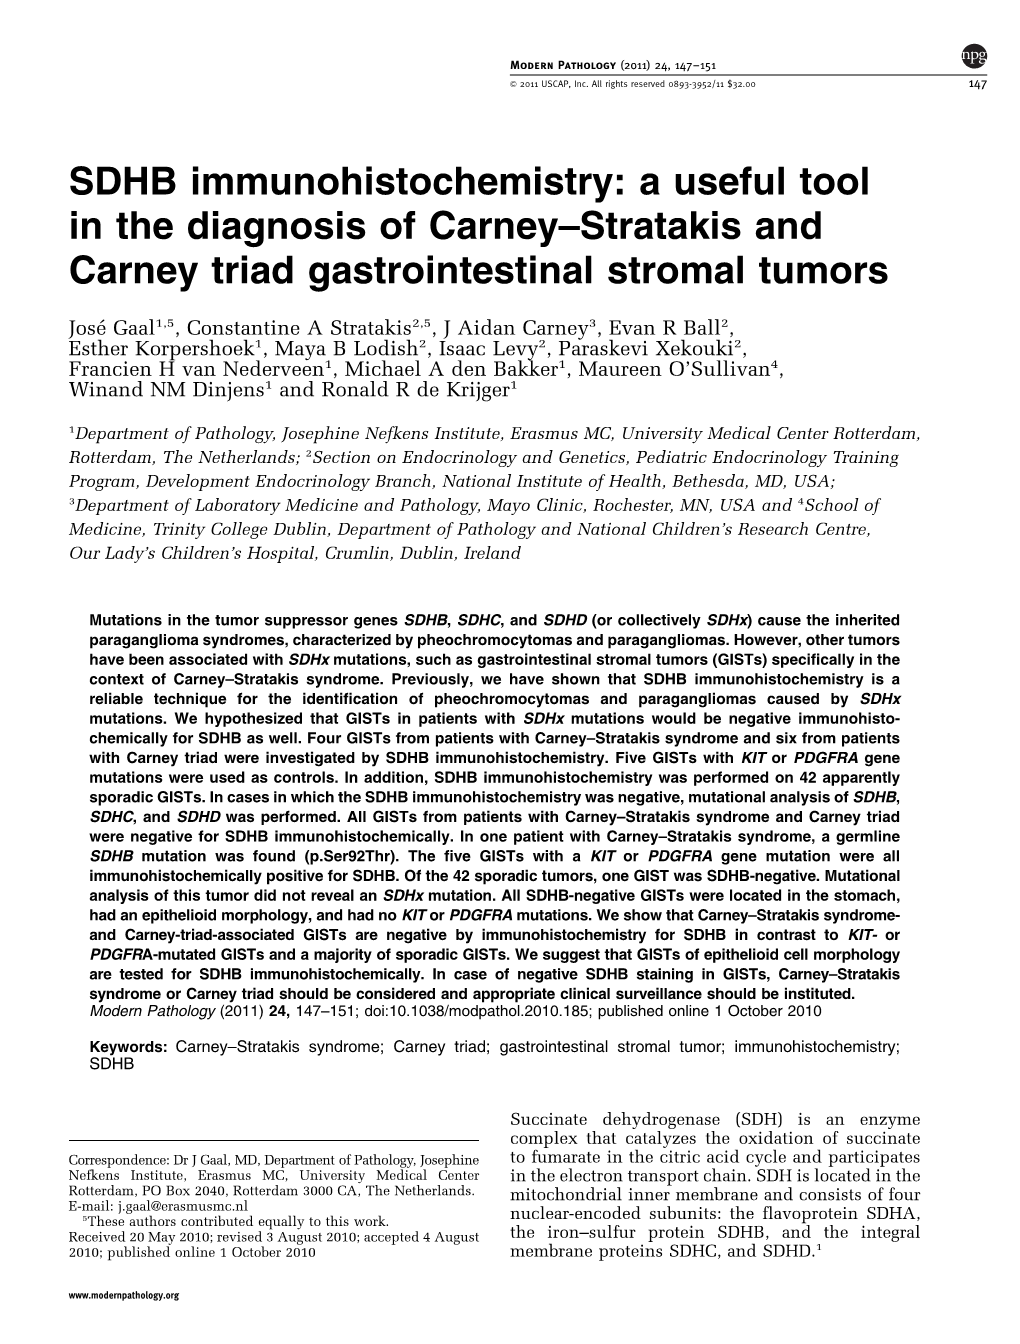 SDHB Immunohistochemistry: a Useful Tool in the Diagnosis of Carney–Stratakis and Carney Triad Gastrointestinal Stromal Tumors